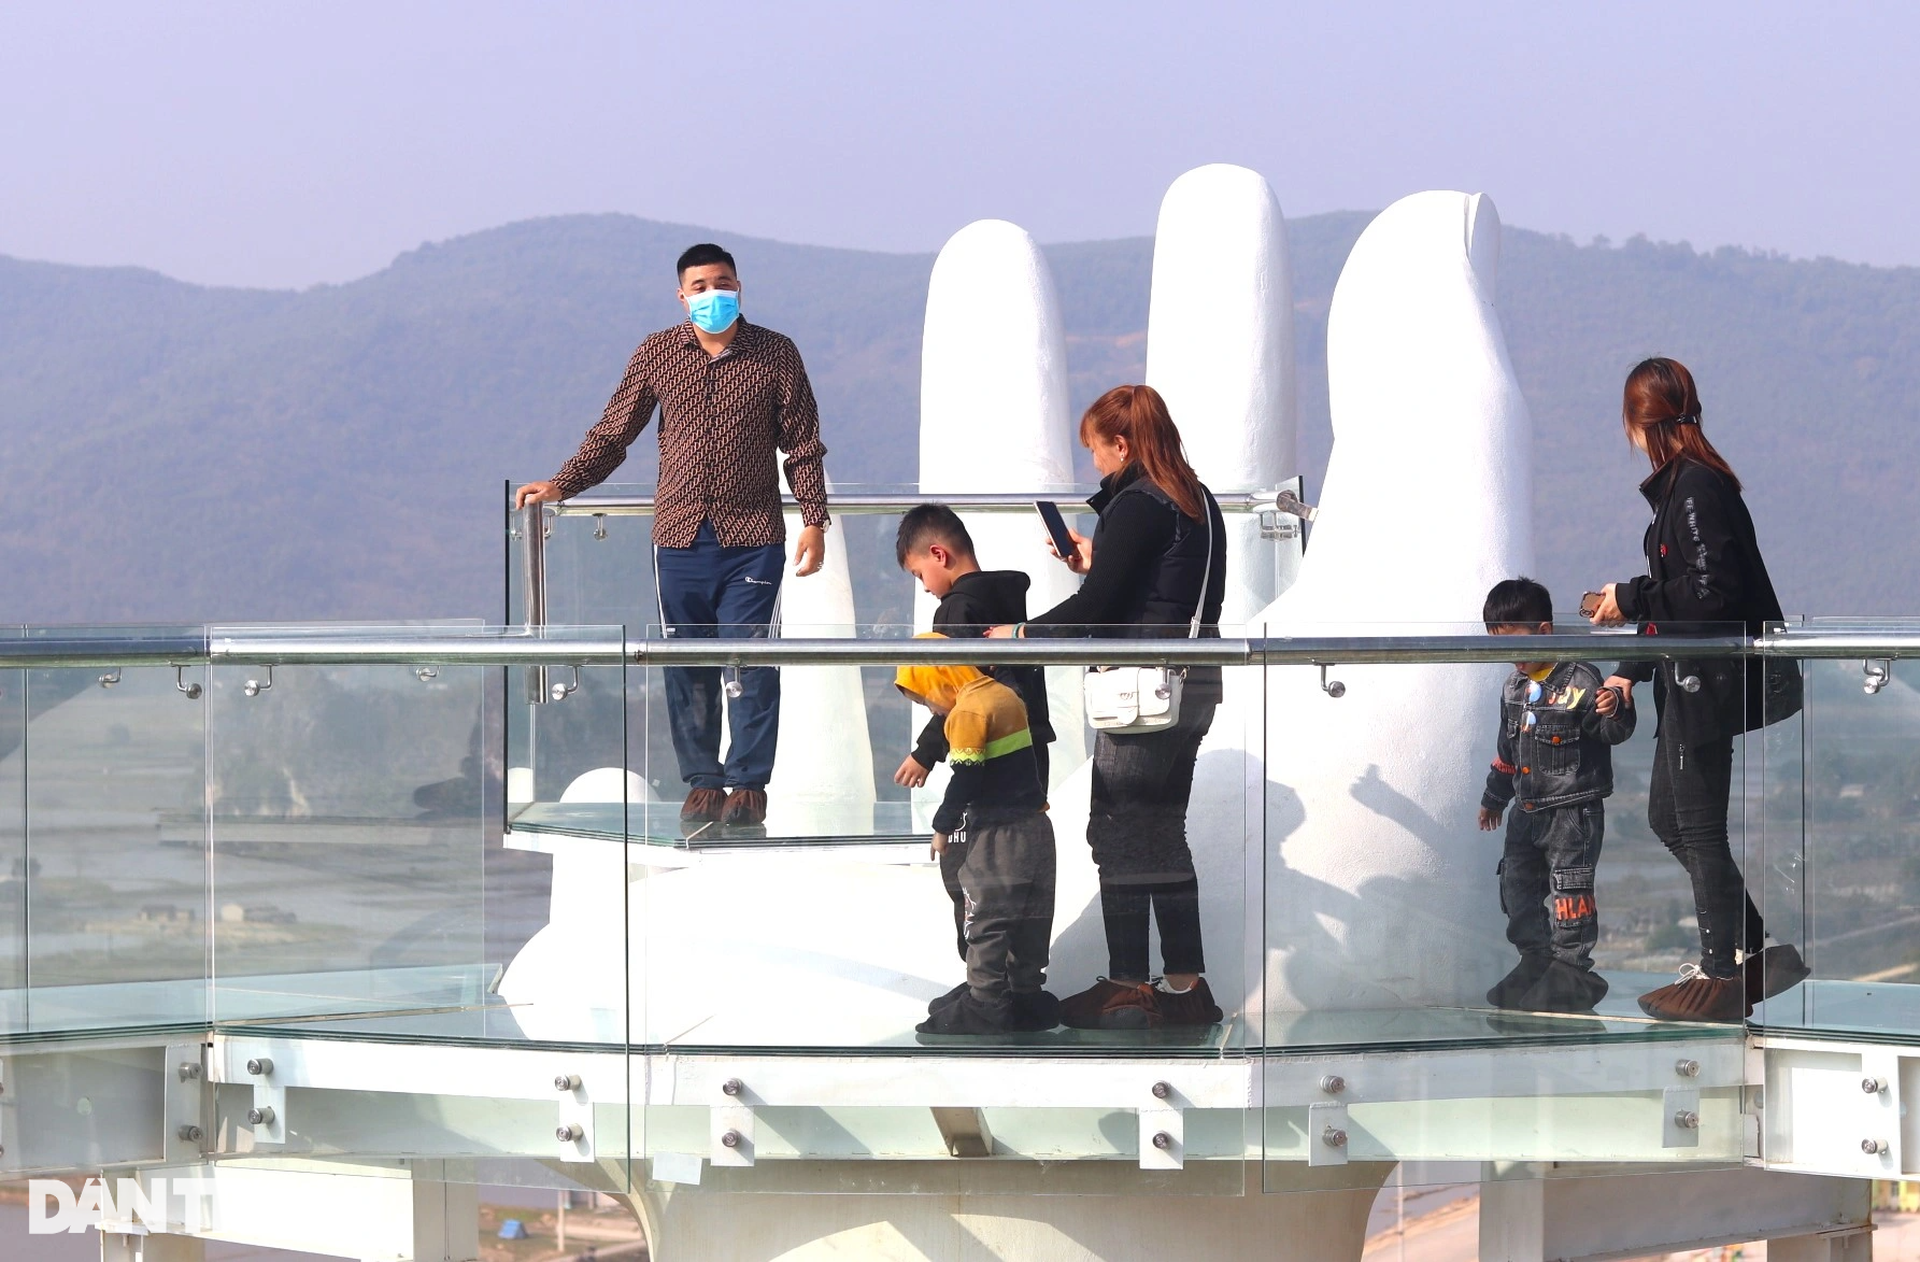 Glass bridge supported by a giant hand, first appeared in Thanh Hoa - 8